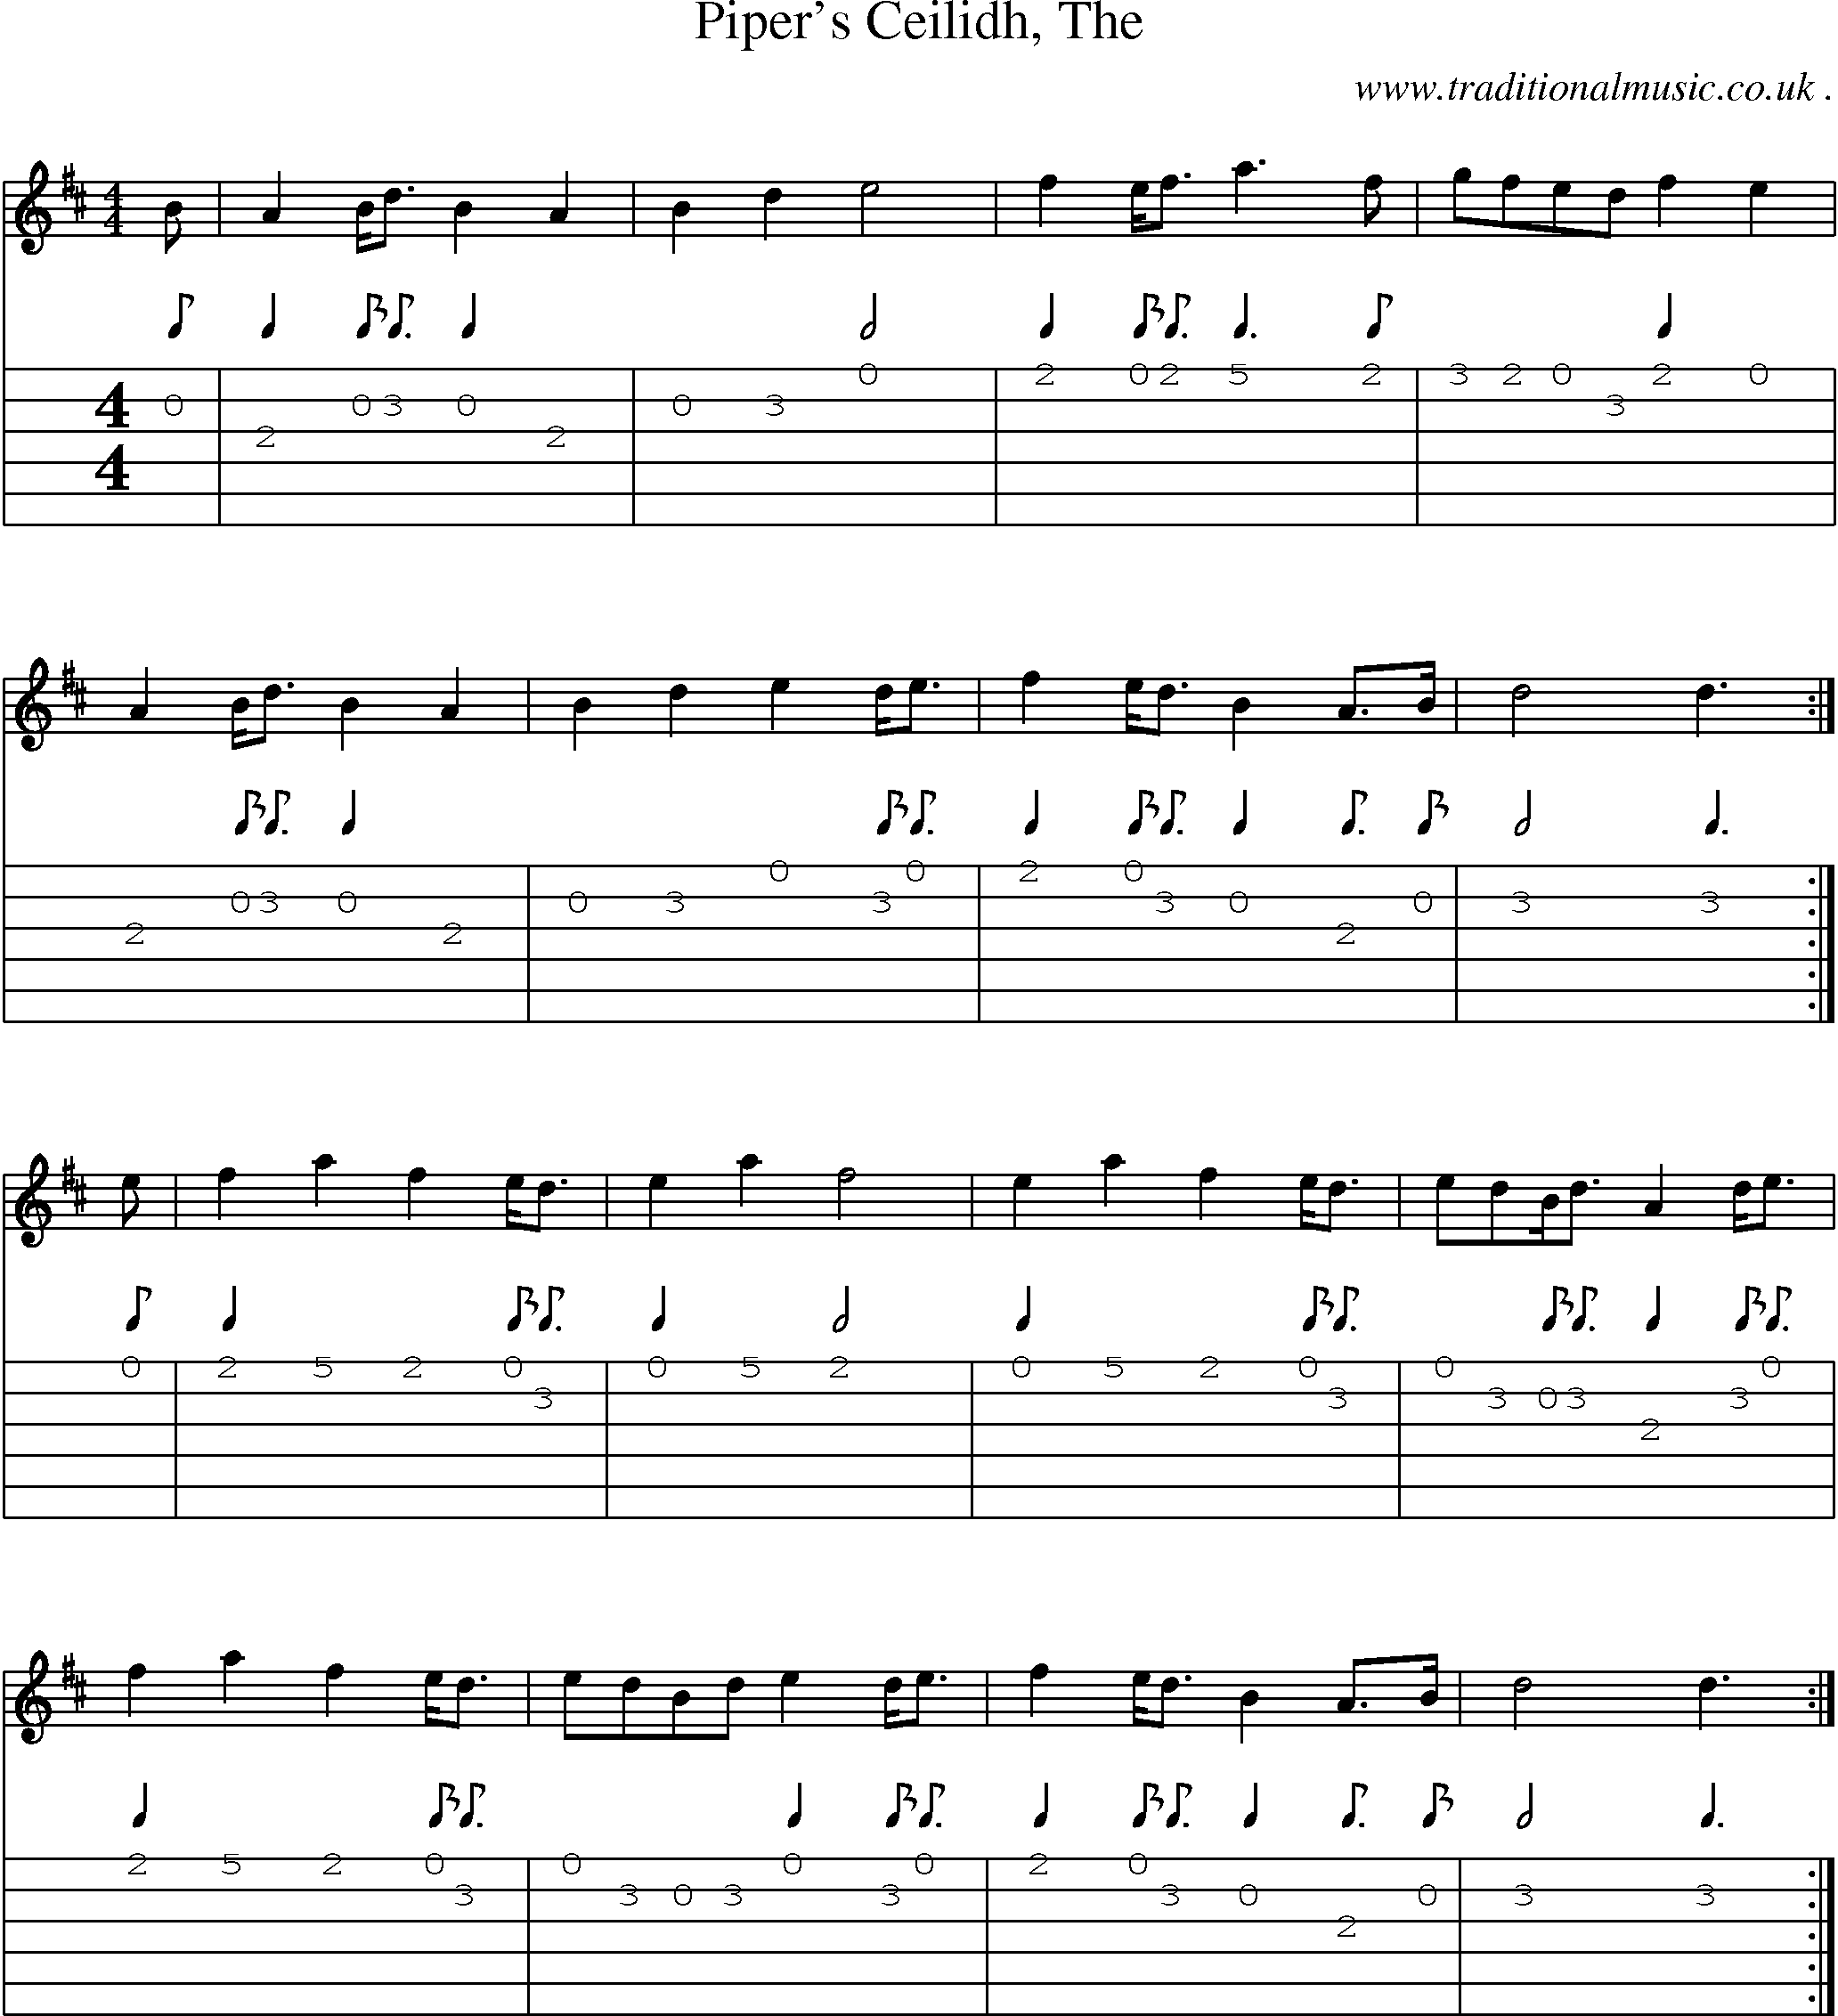 Sheet-music  score, Chords and Guitar Tabs for Pipers Ceilidh The